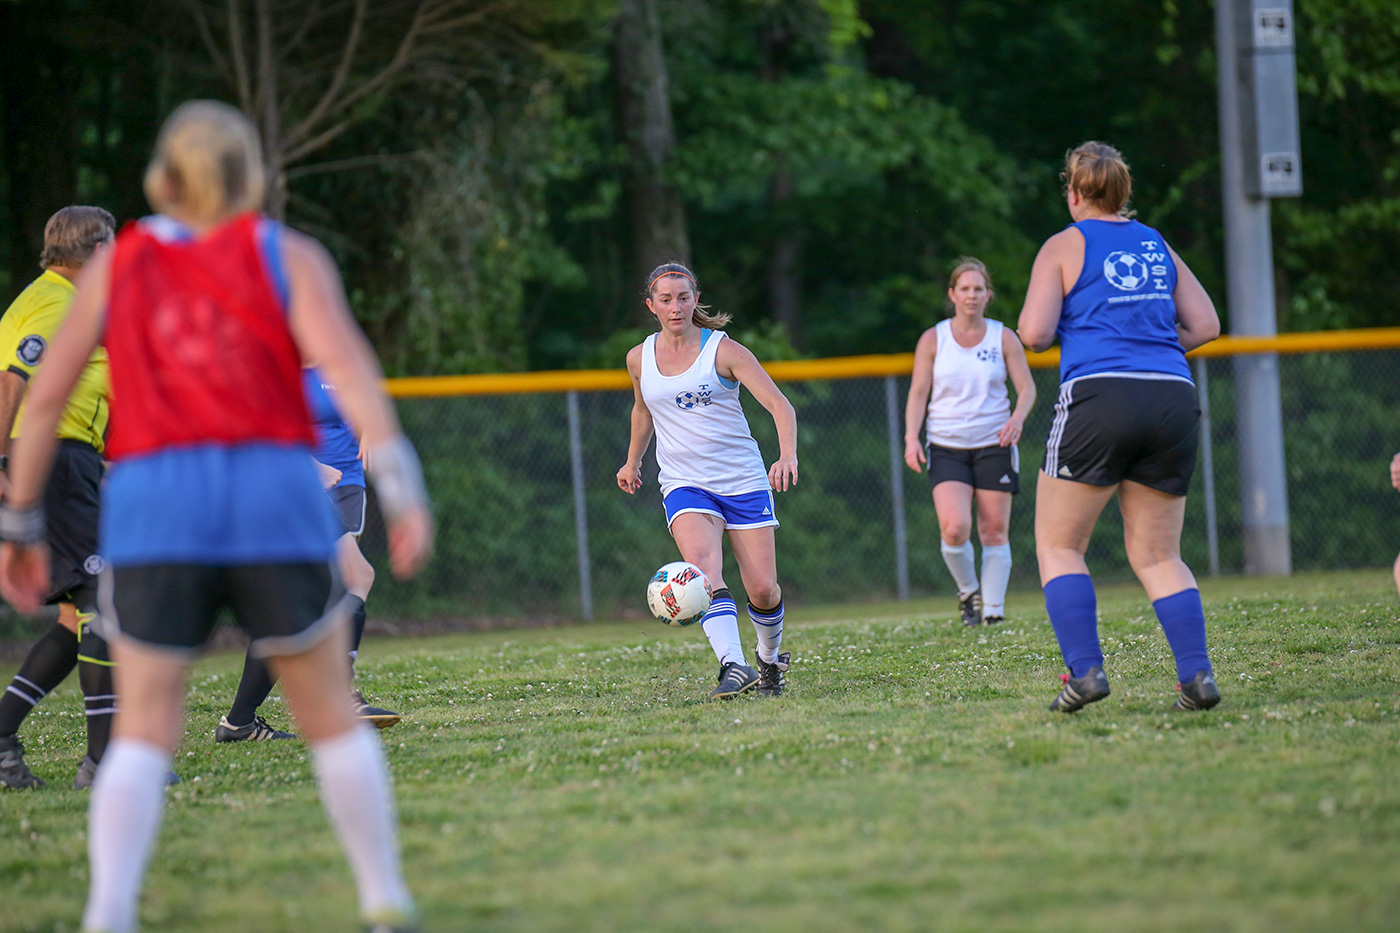 TWSL womens soccer league in action